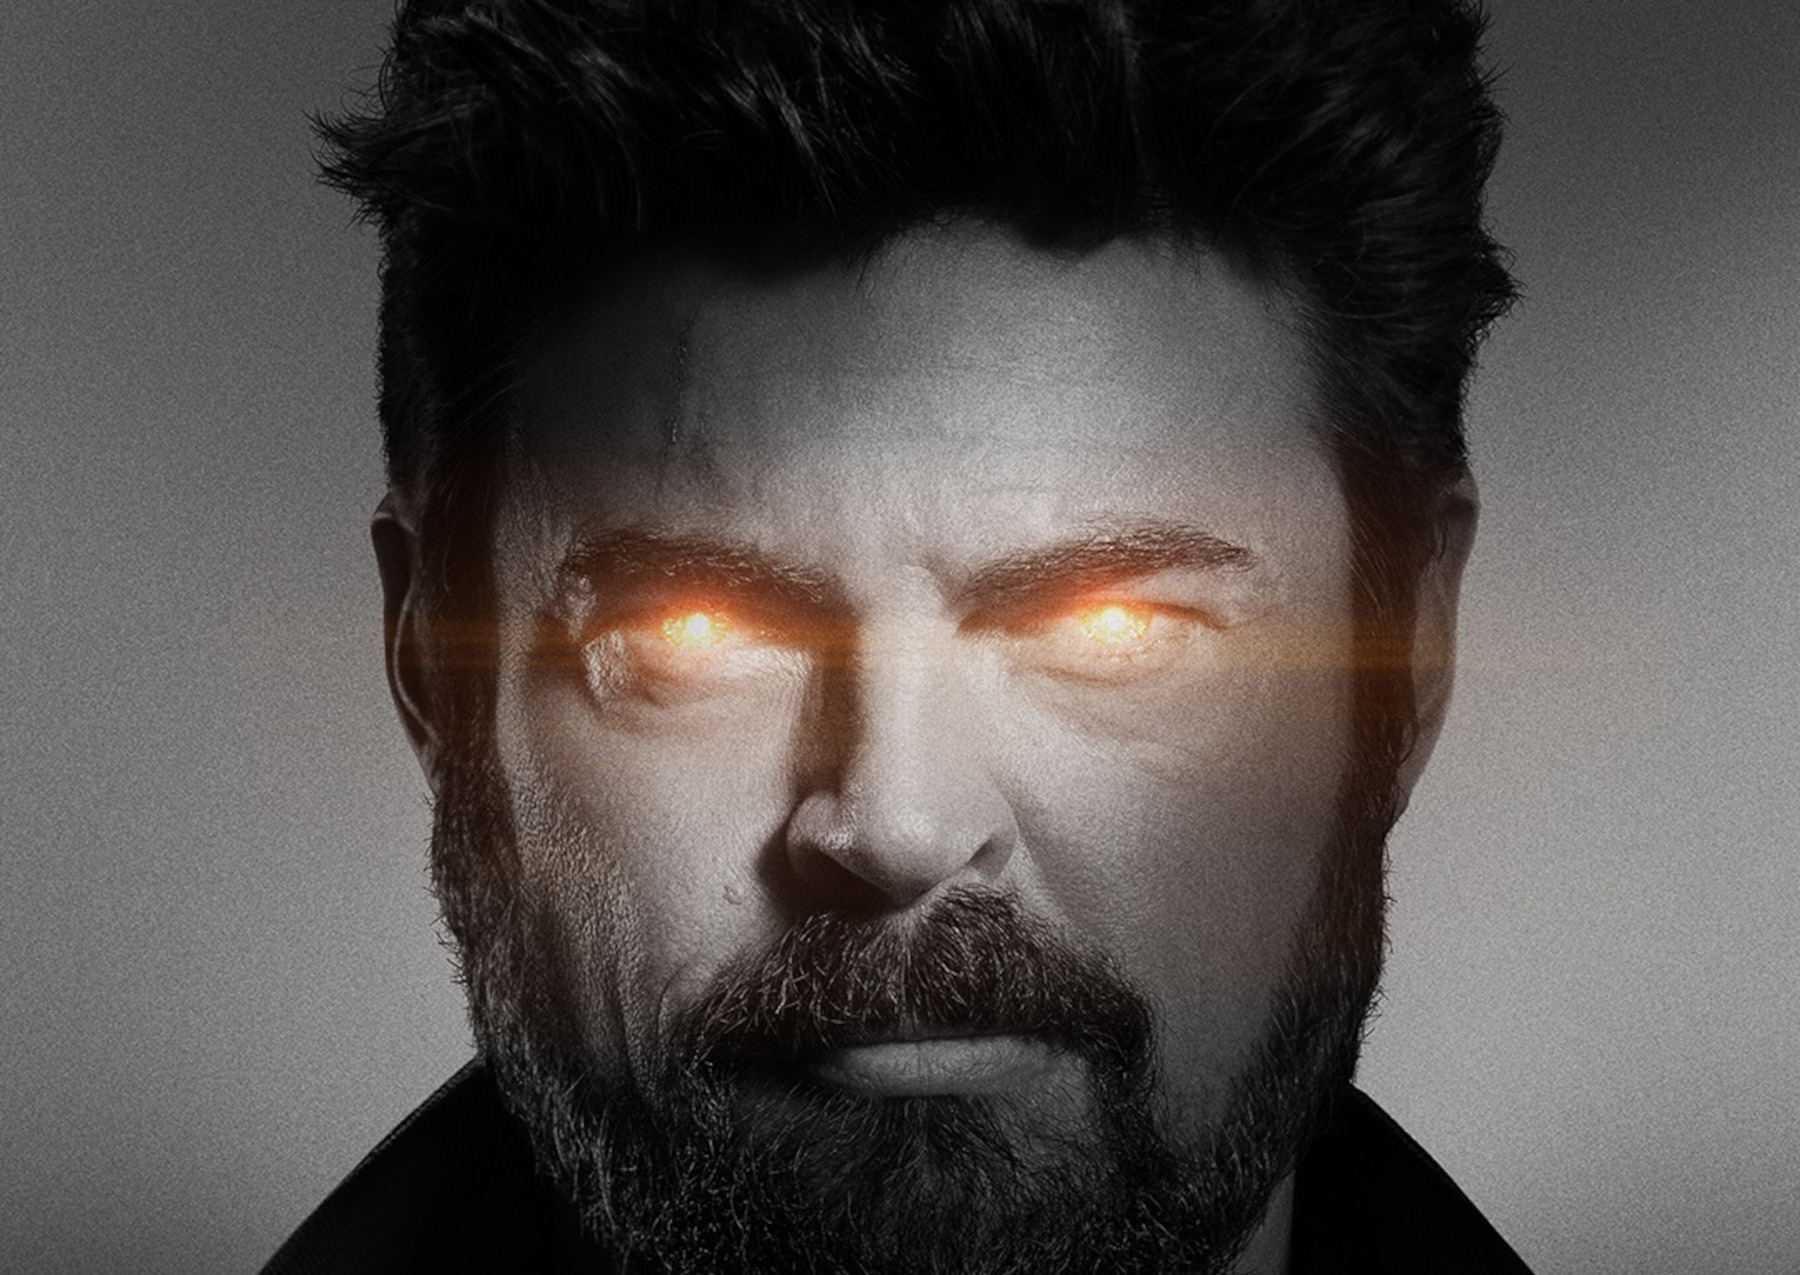 Part of the poster for 'The Boys' Season 3 showing Billy Butcher using laser vision.